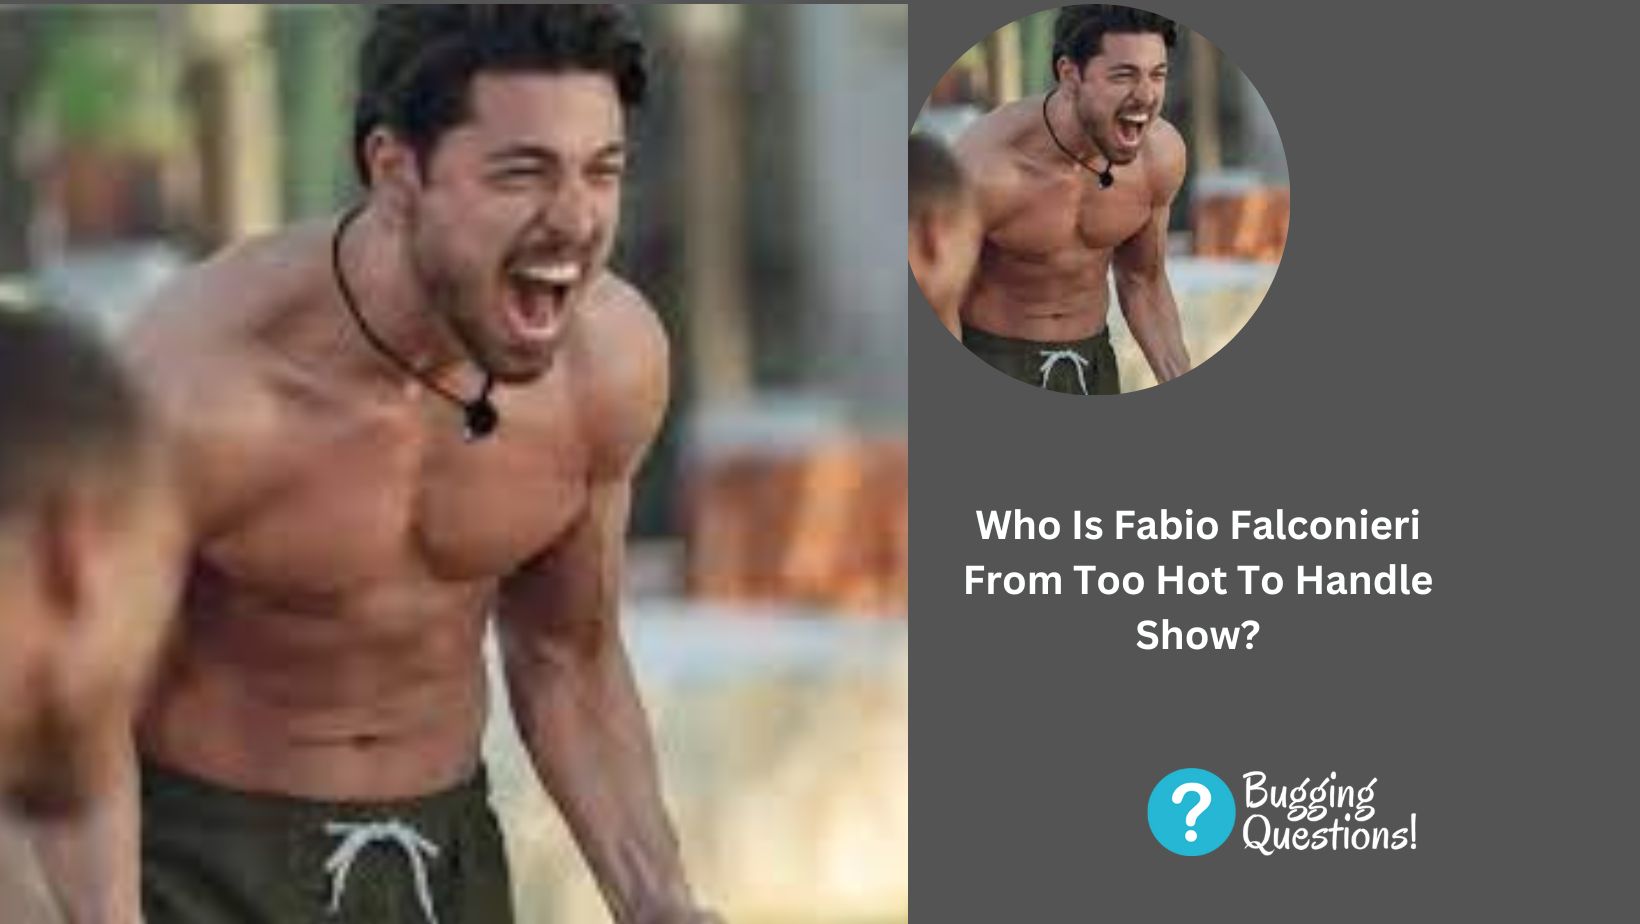 Who Is Fabio Falconieri From Too Hot To Handle Show?